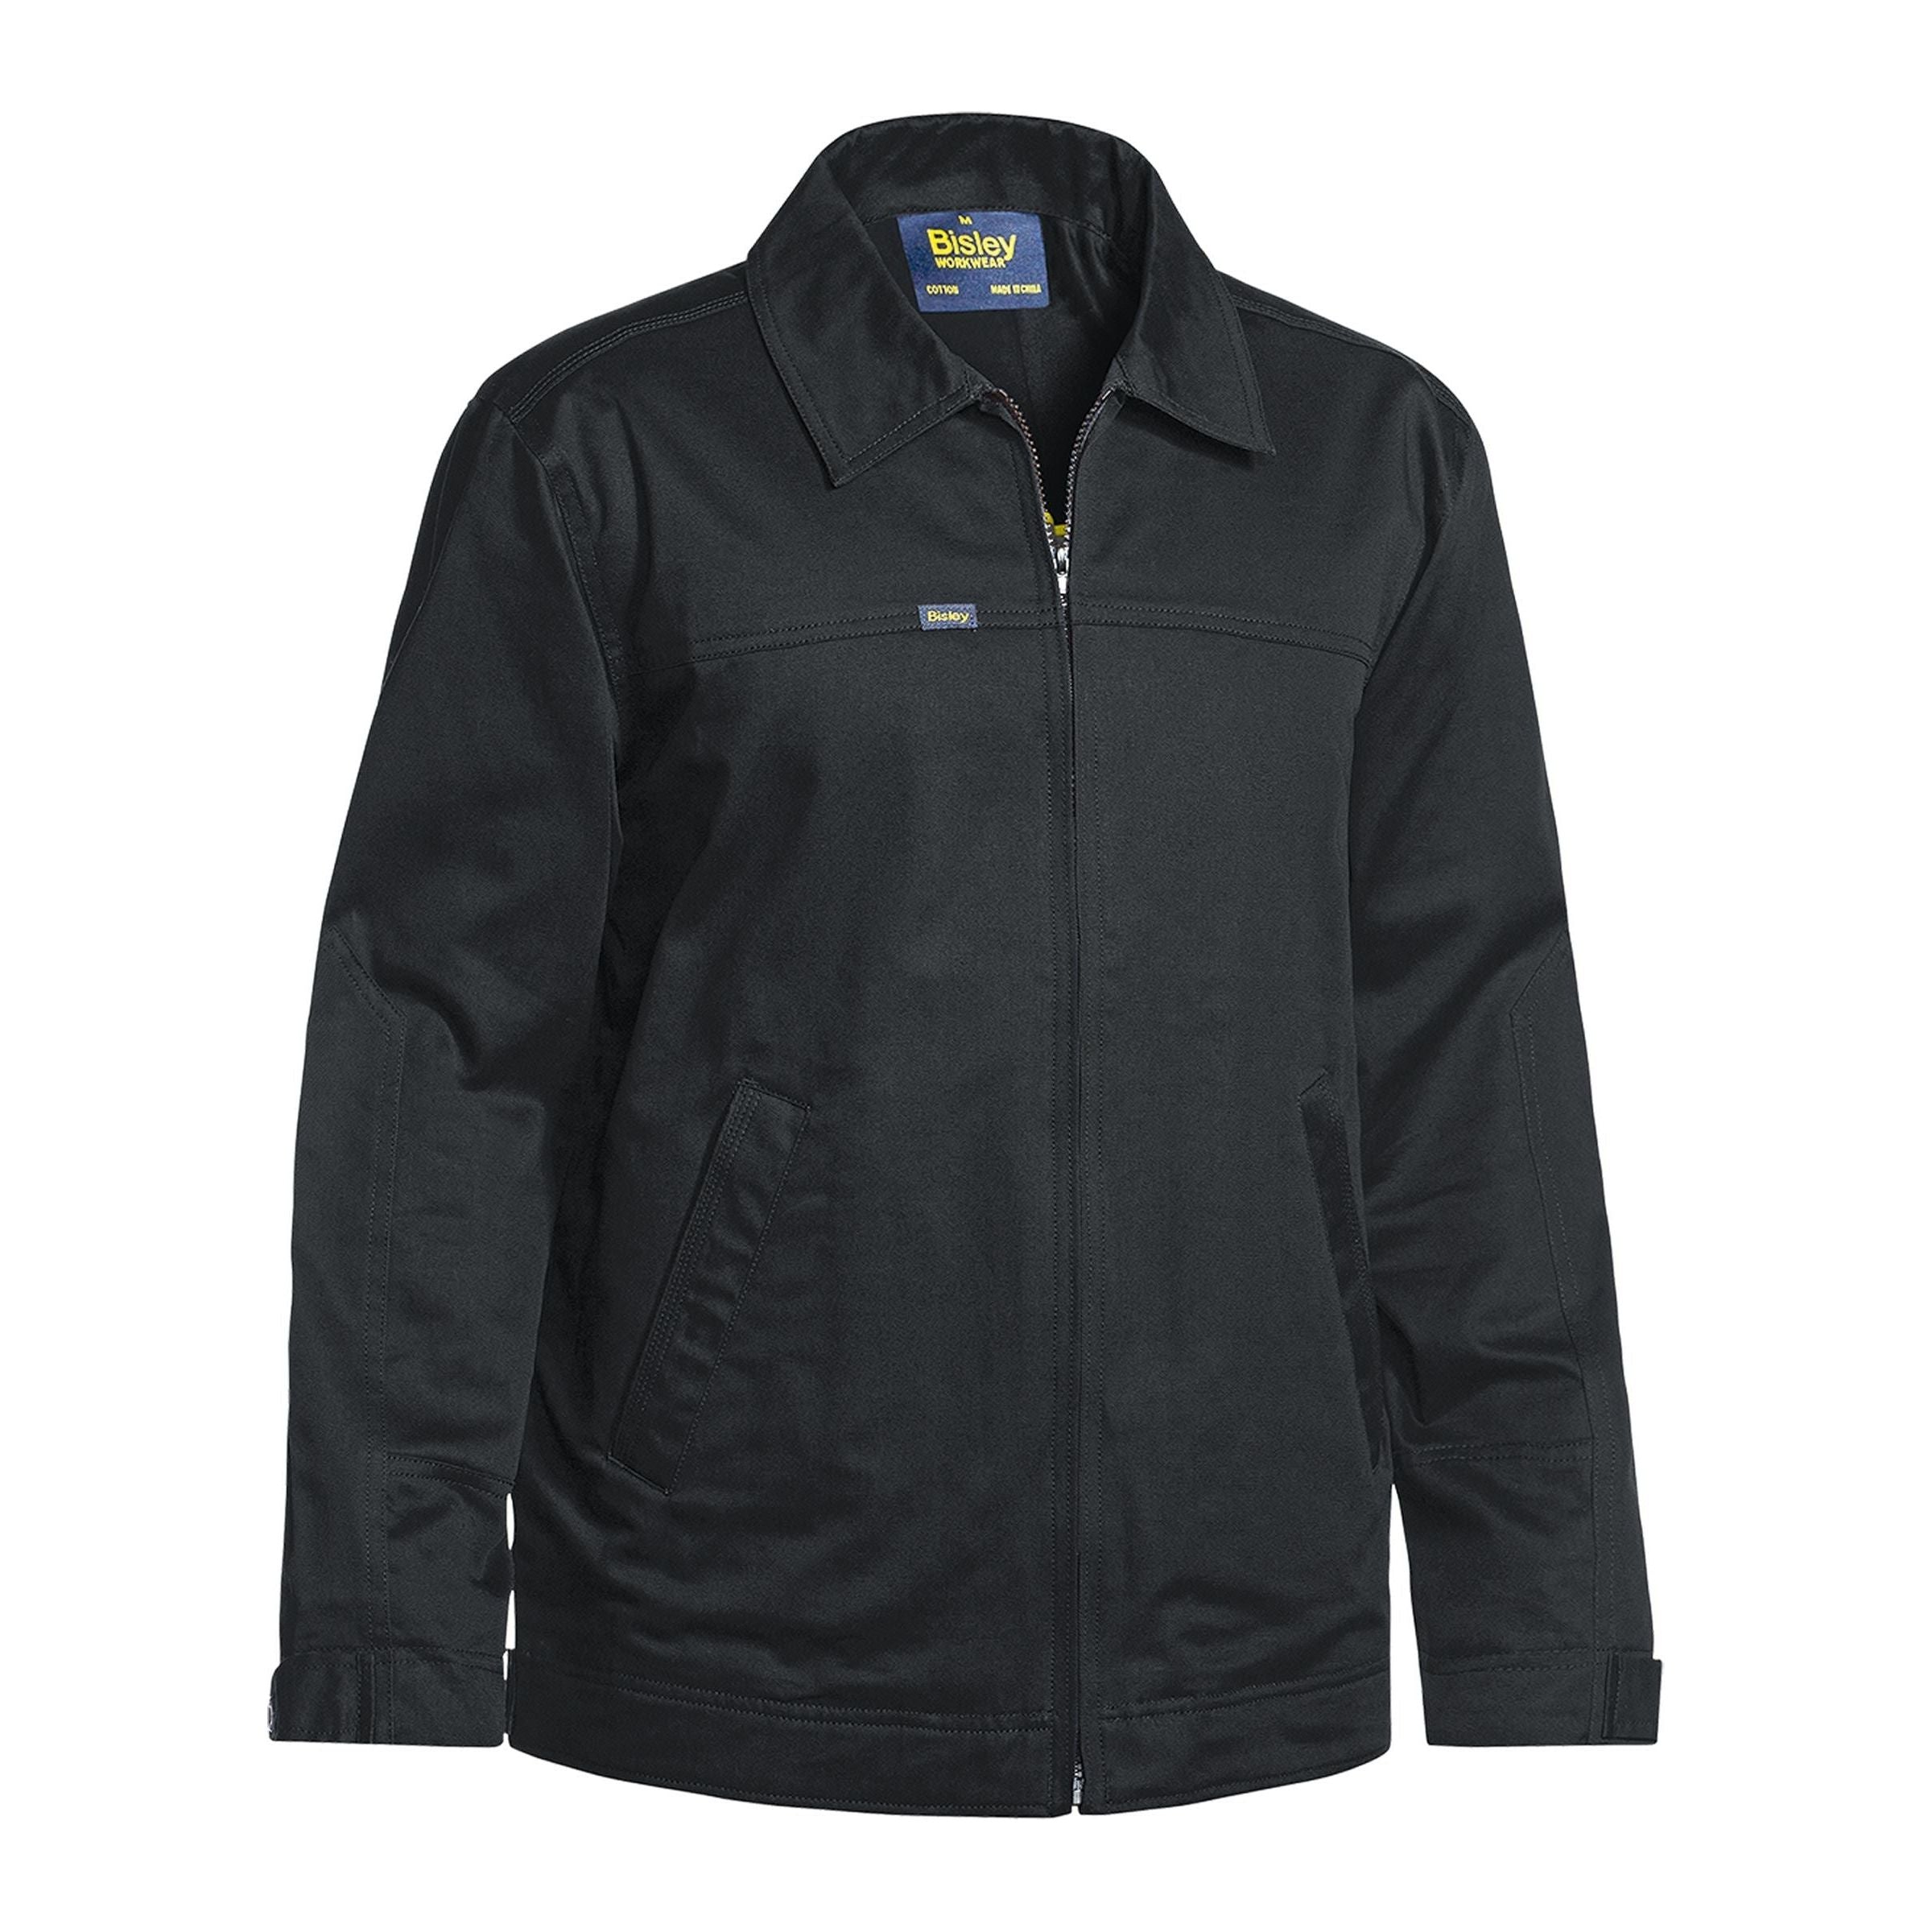 Drill Jacket With Liquid Repellent Finish - BJ6916